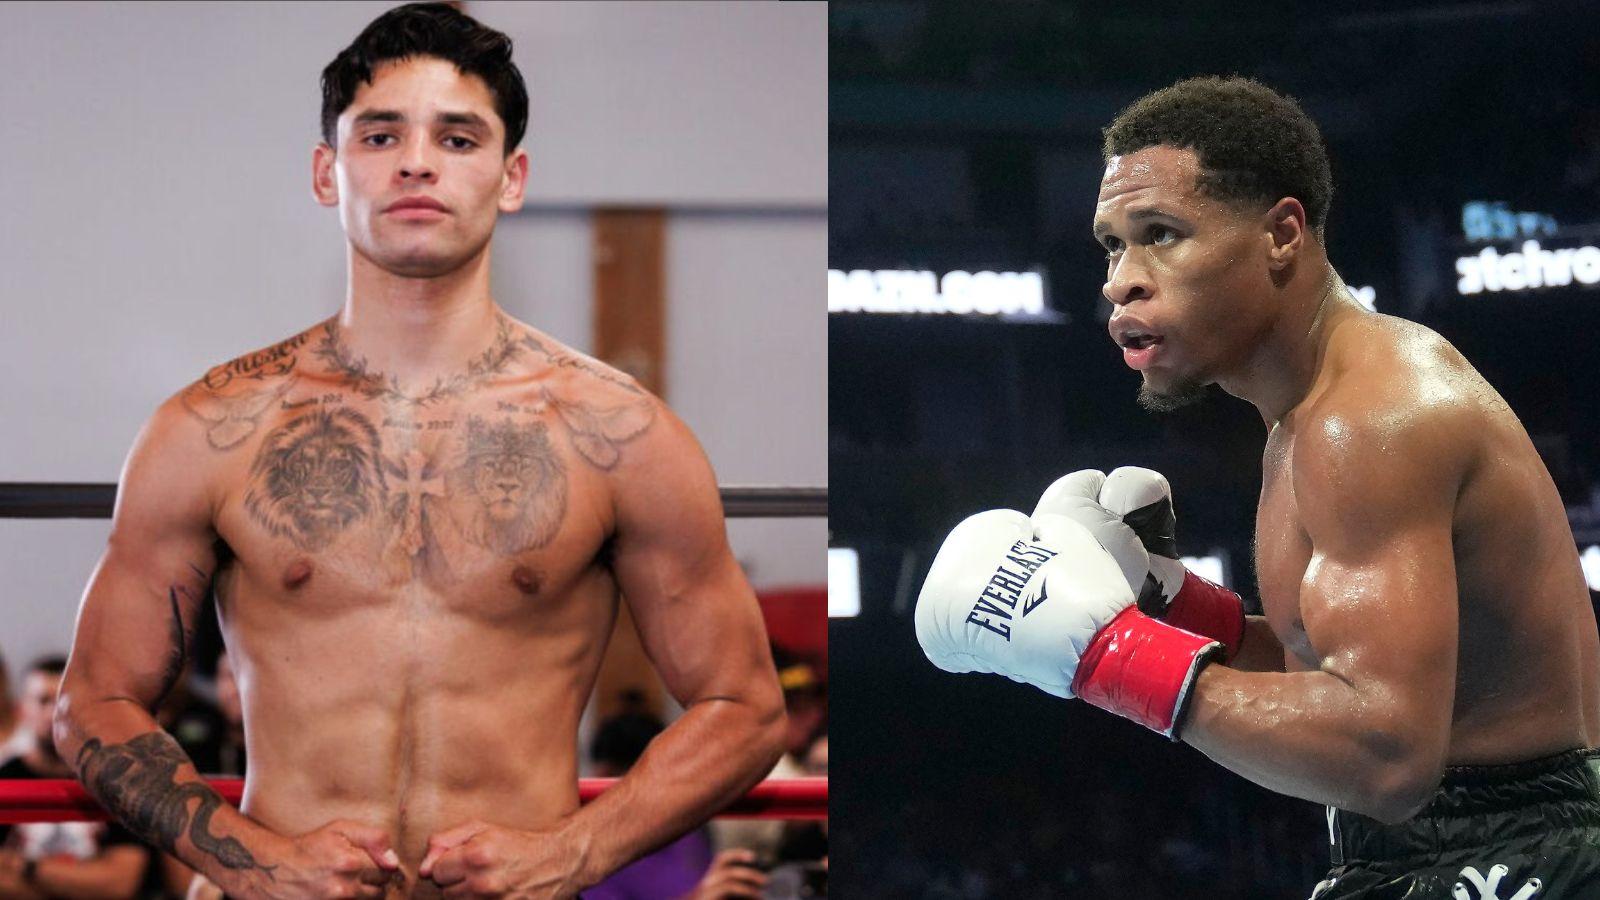 Ryan Garcia must pay Devin Haney $1.5 million after failing to make weight for their boxing match